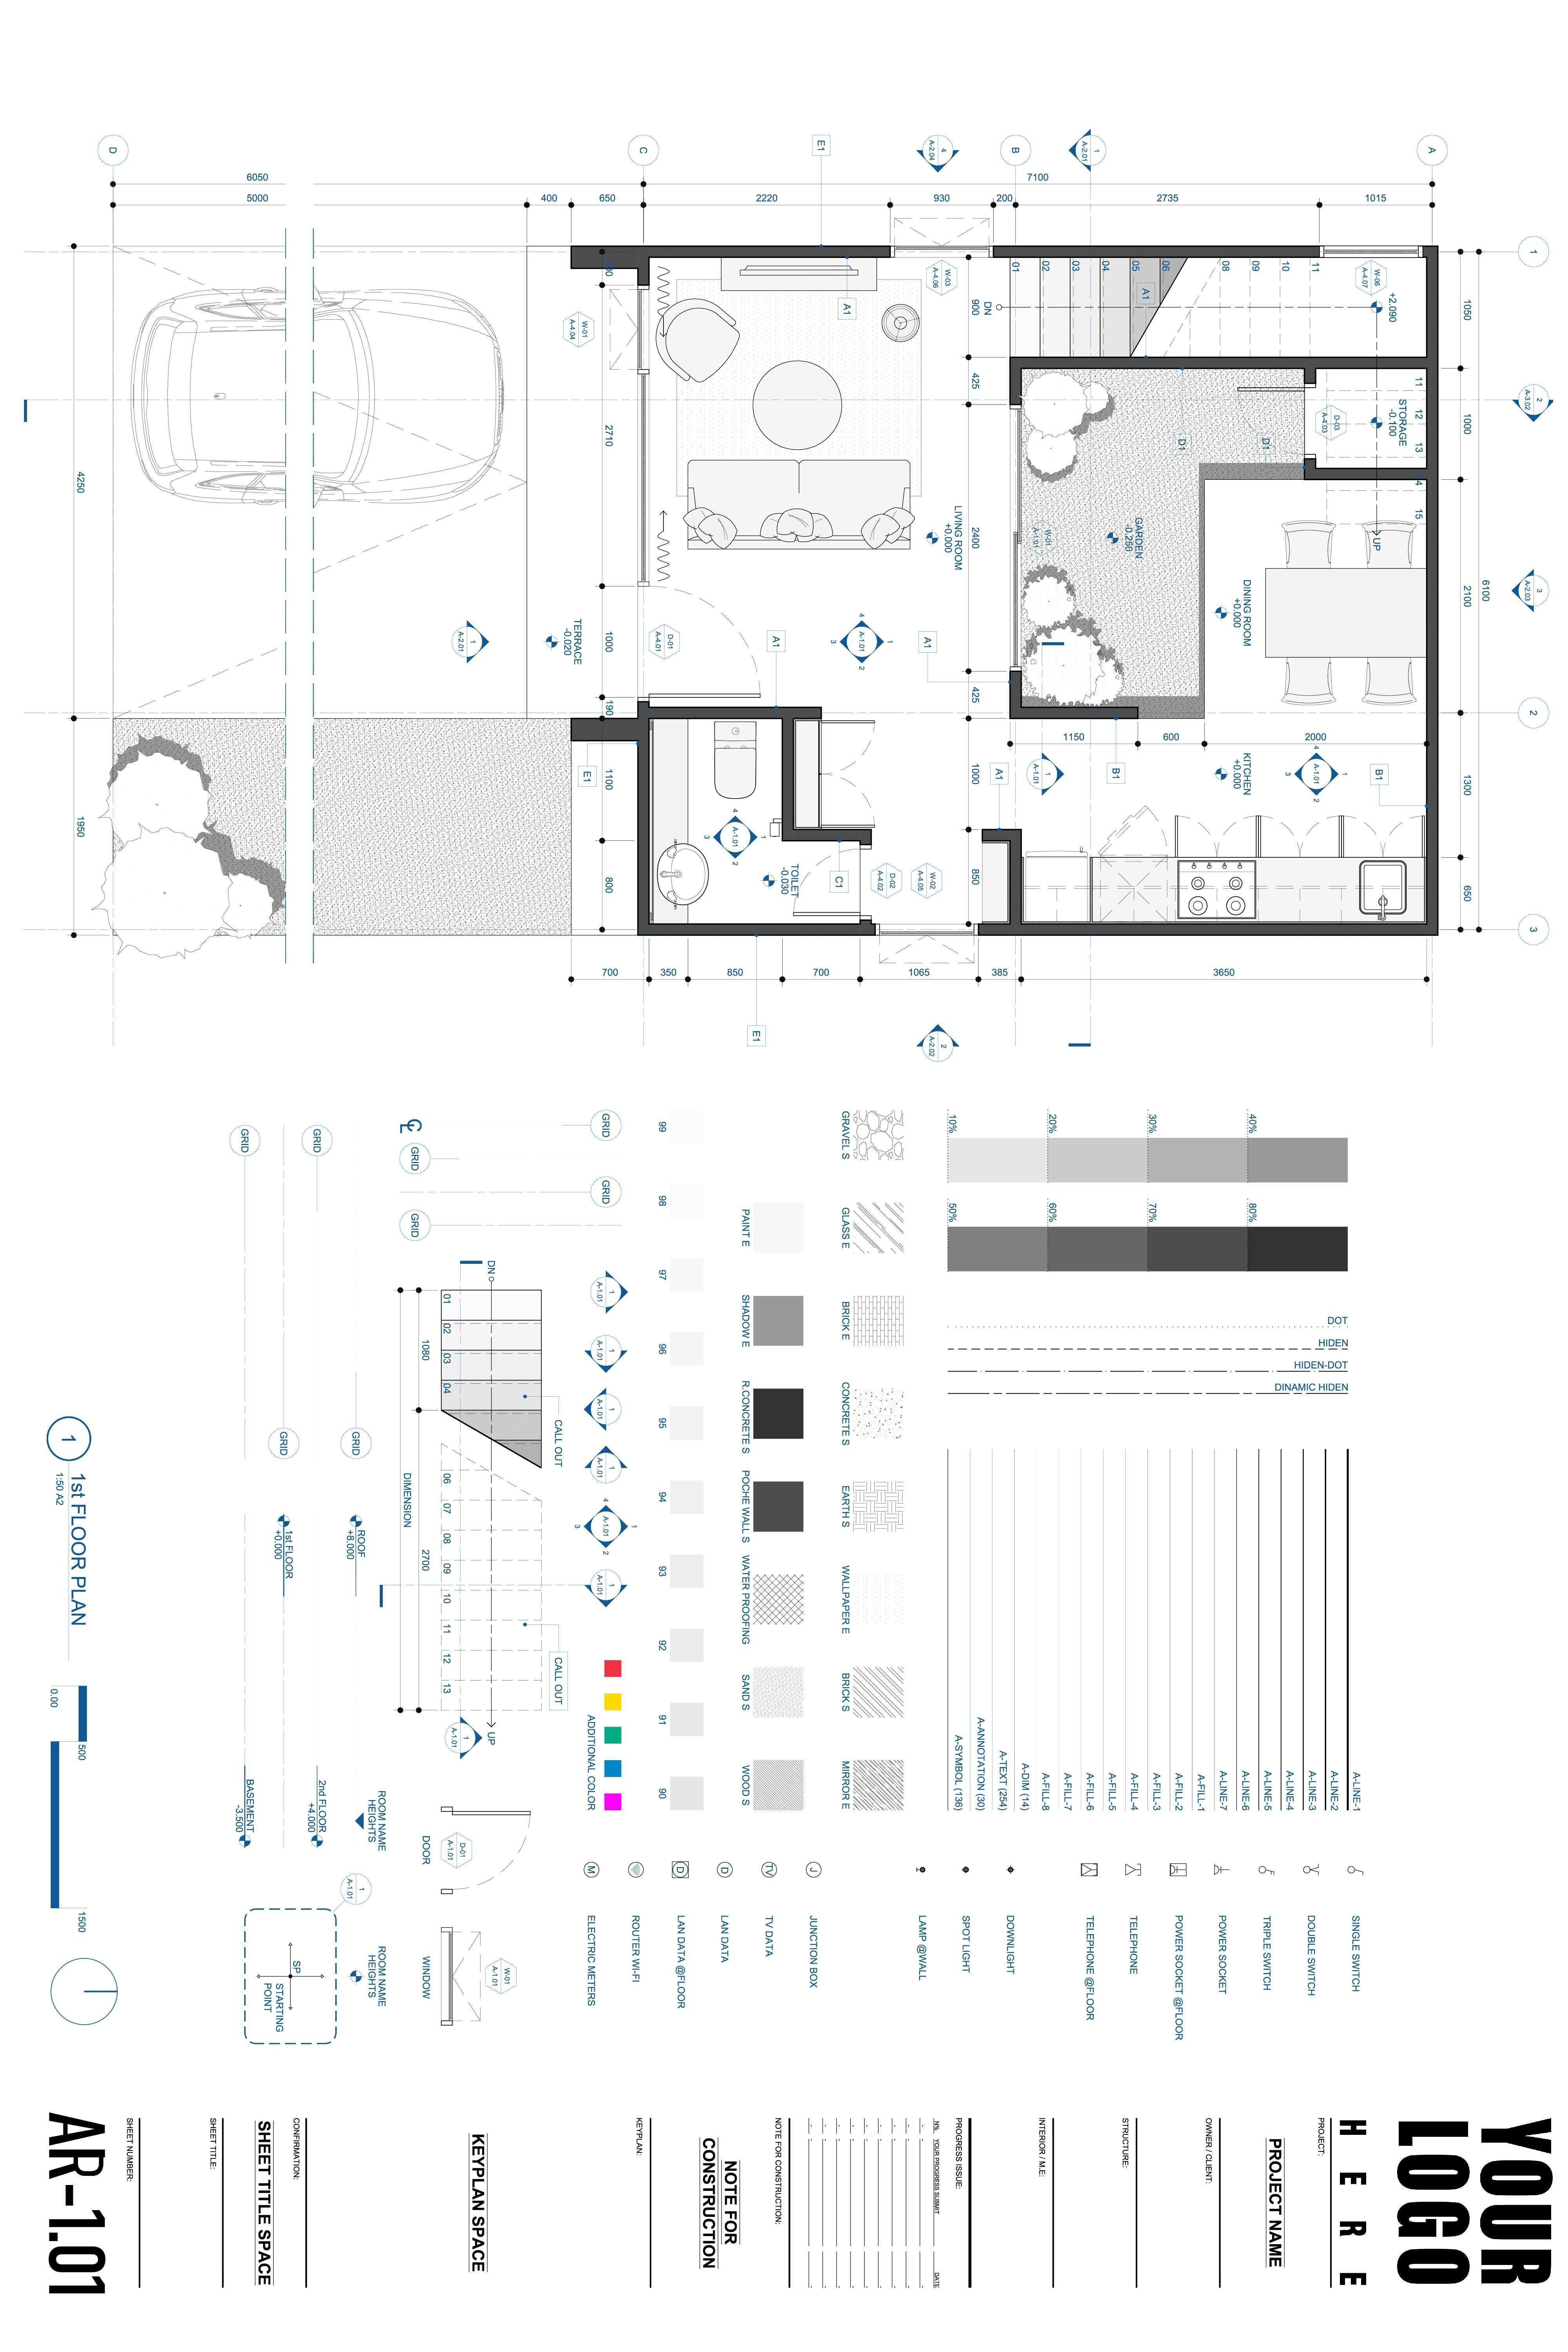 Autocad Template Architecture Drawing Architecture Drawing Plan Autocad Layout Autocad